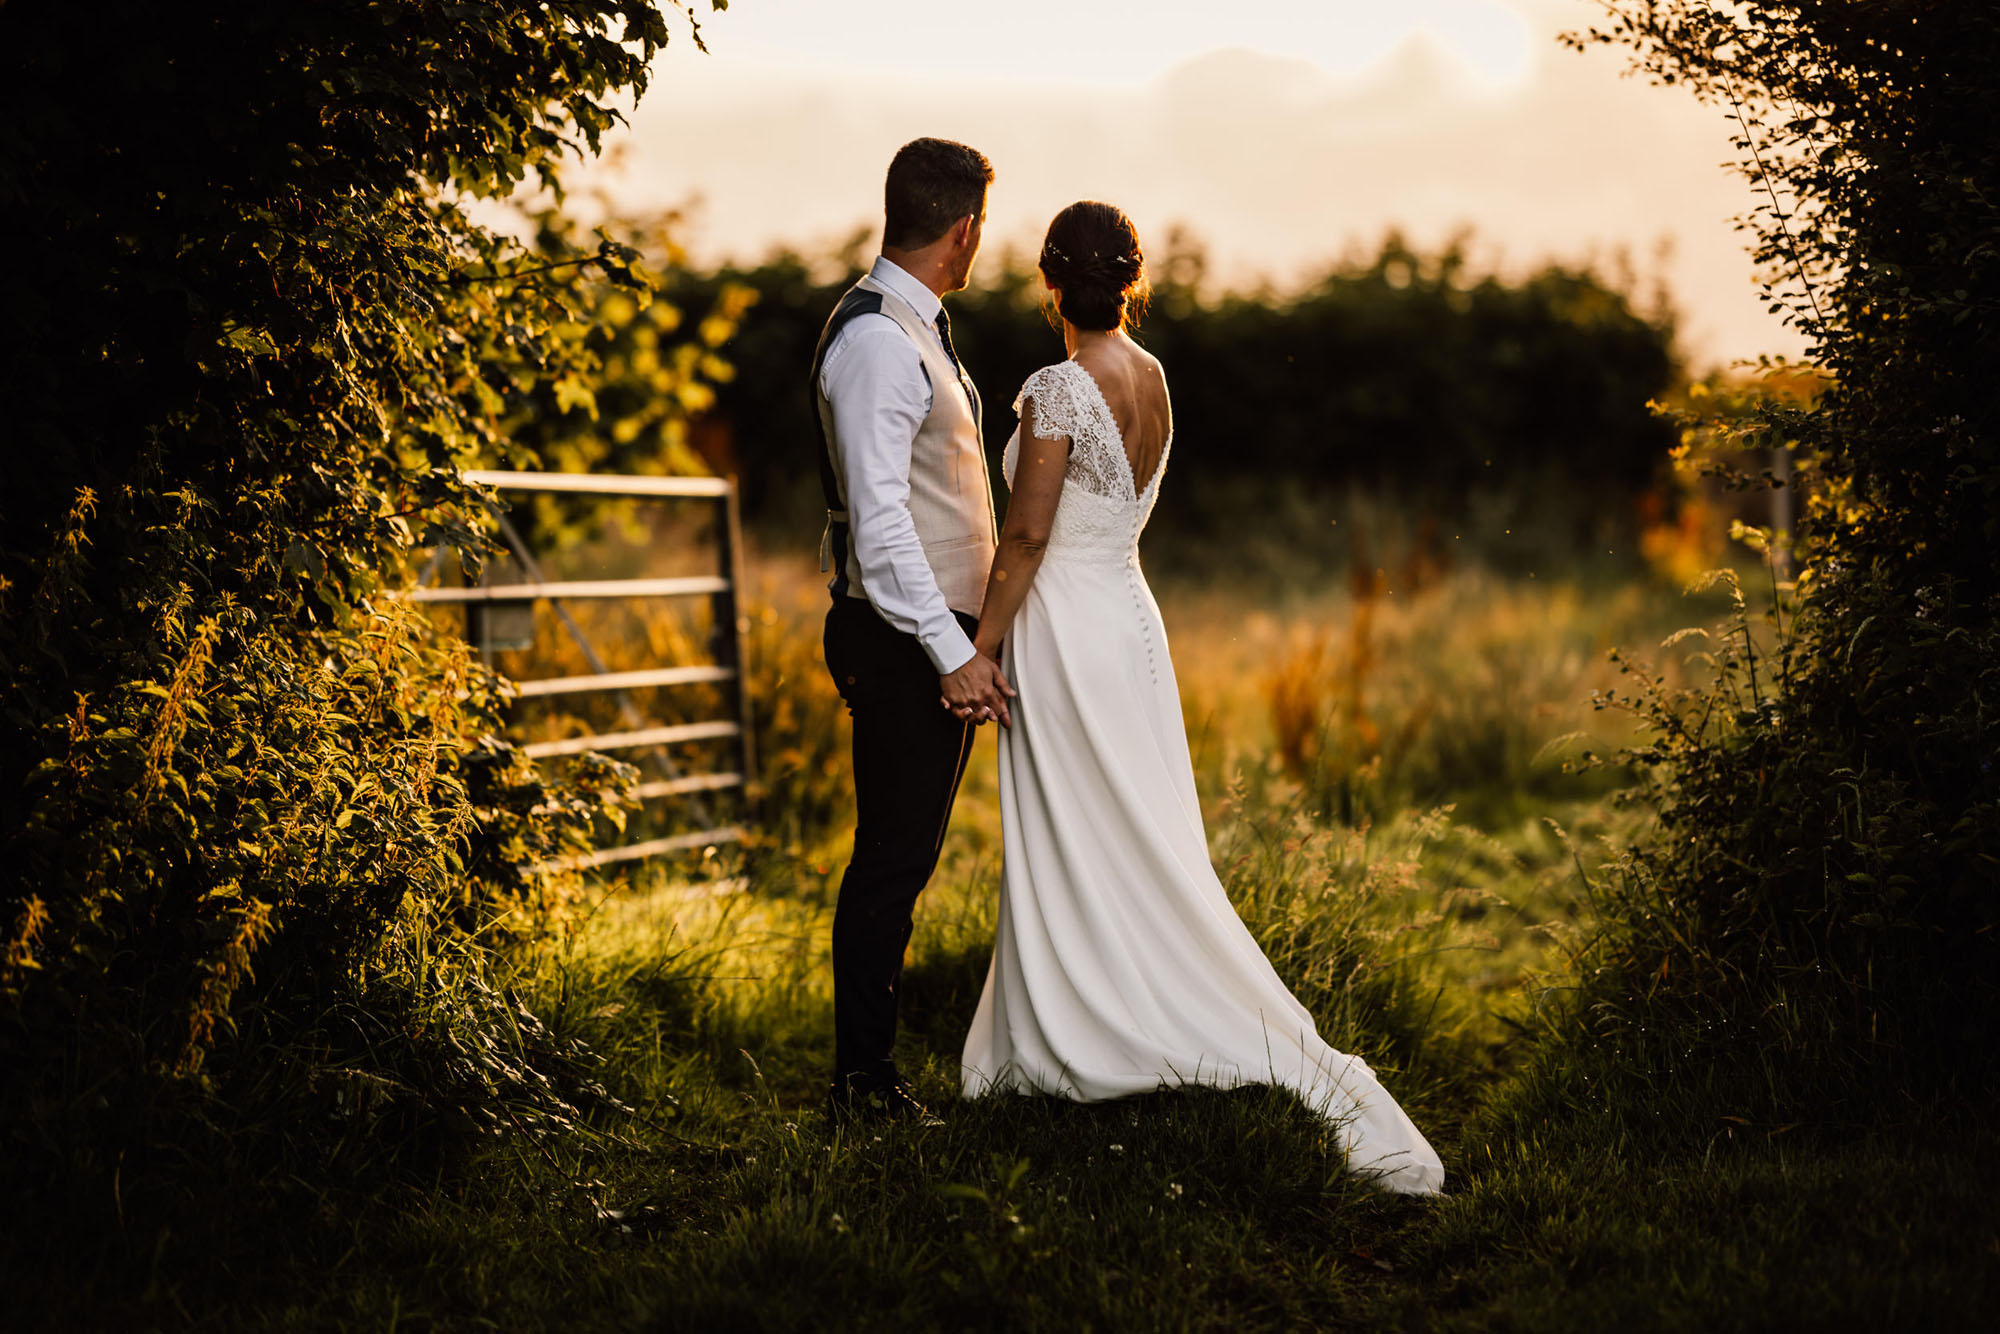 Golden hour wedding portrait of newlyweds in the countryside looking away from the camera and to the horizon. By Chris Armstrong Photography in Cornwall